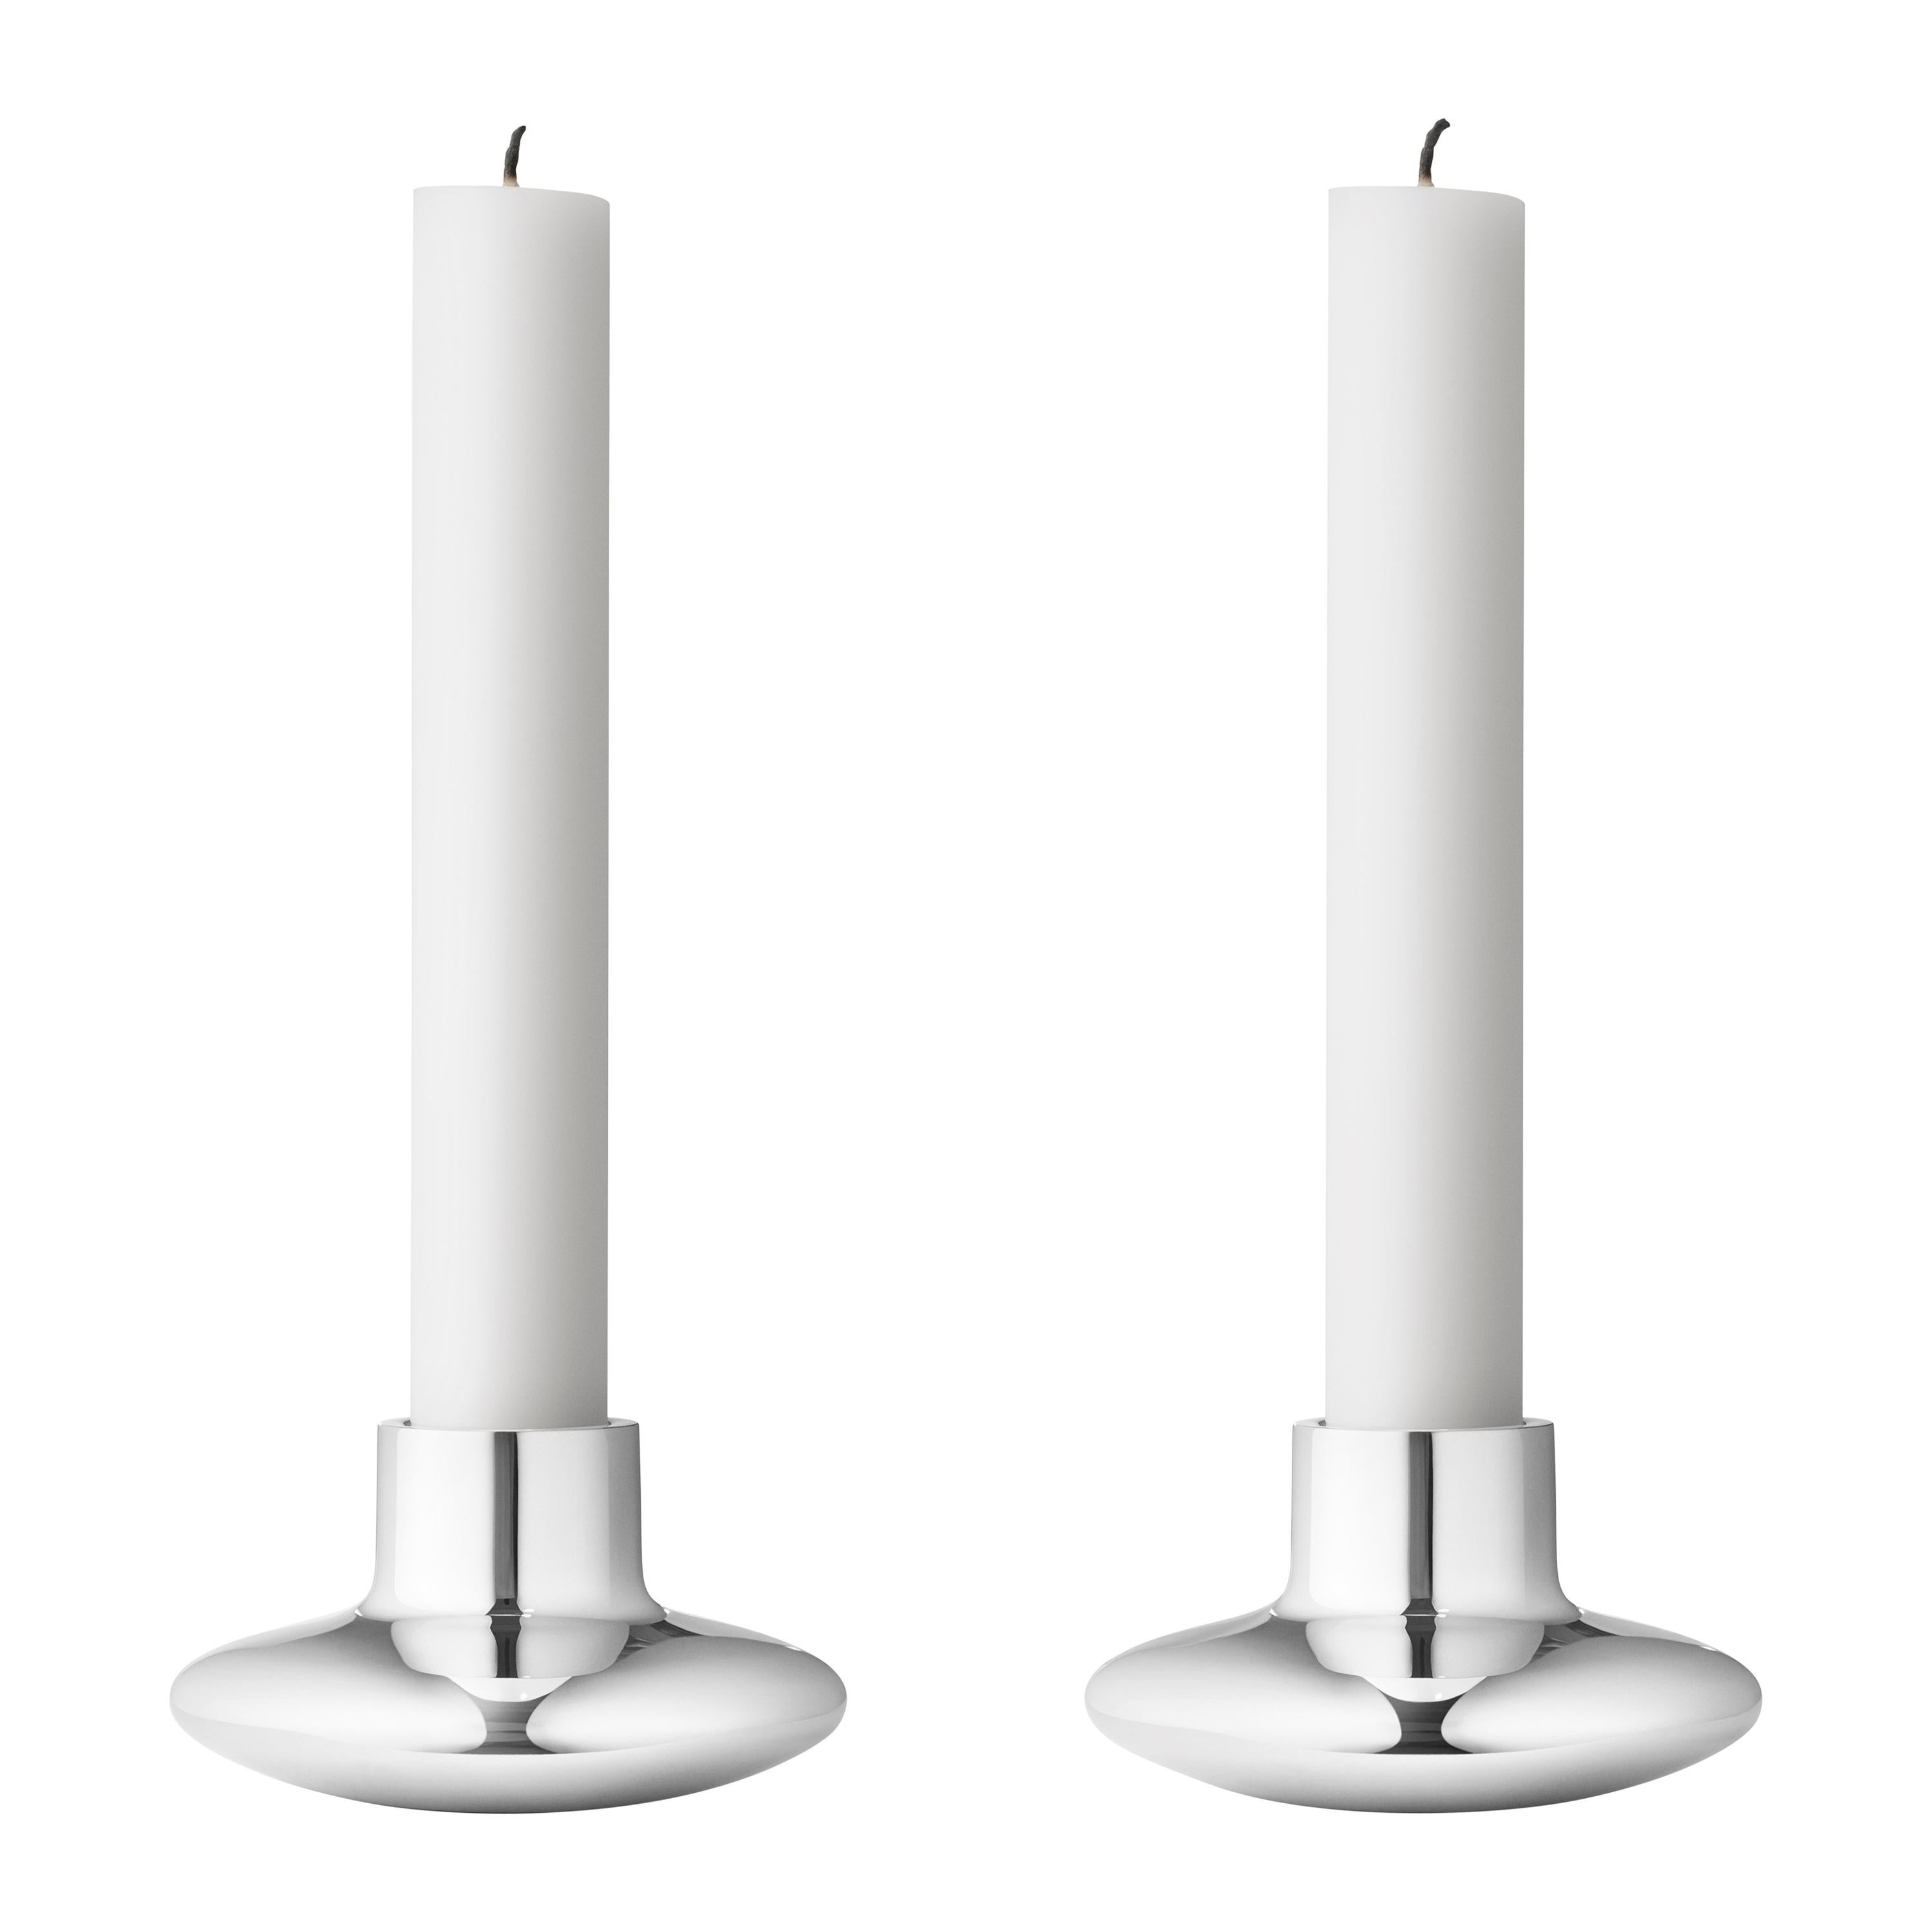 Henning Koppel Set of Candle Holders in Stainless Steel Finish by Georg Jensen